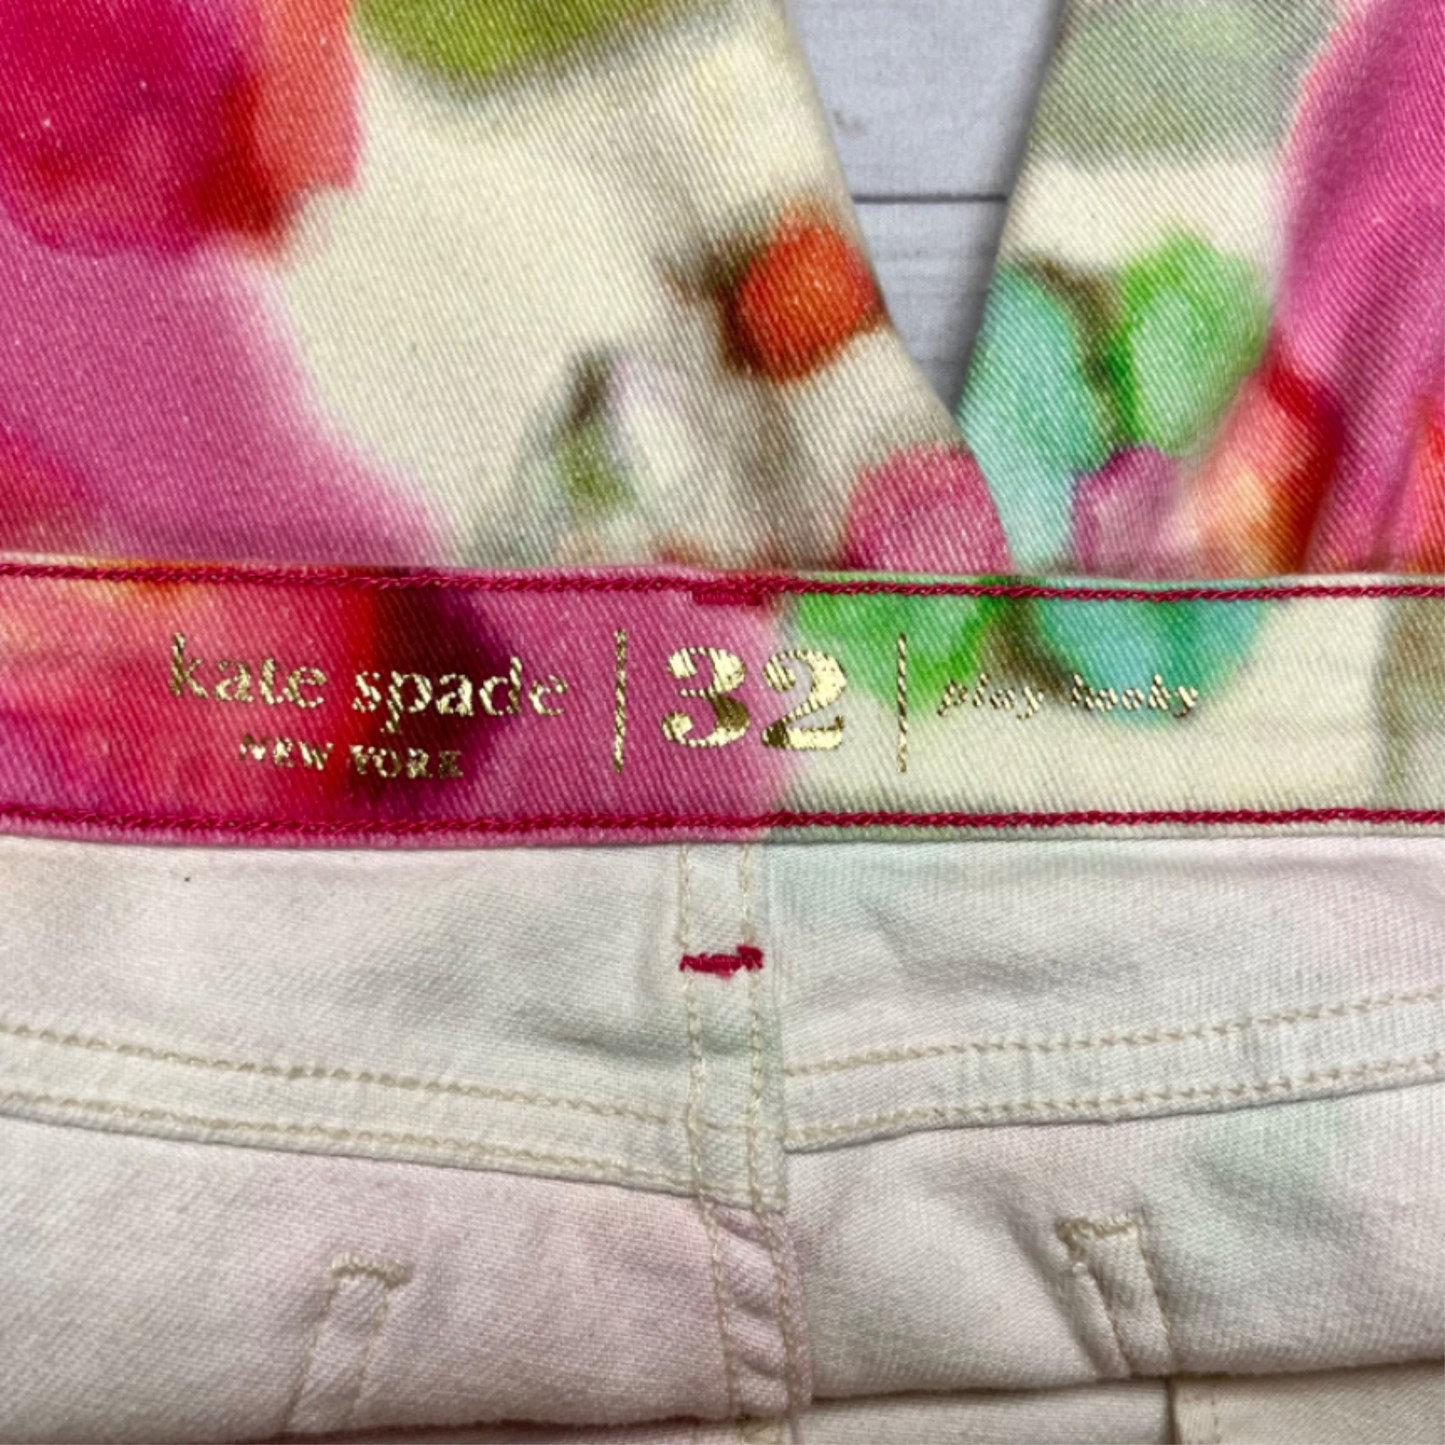 Multi-colored Jeans Designer By Kate Spade, Size: 14